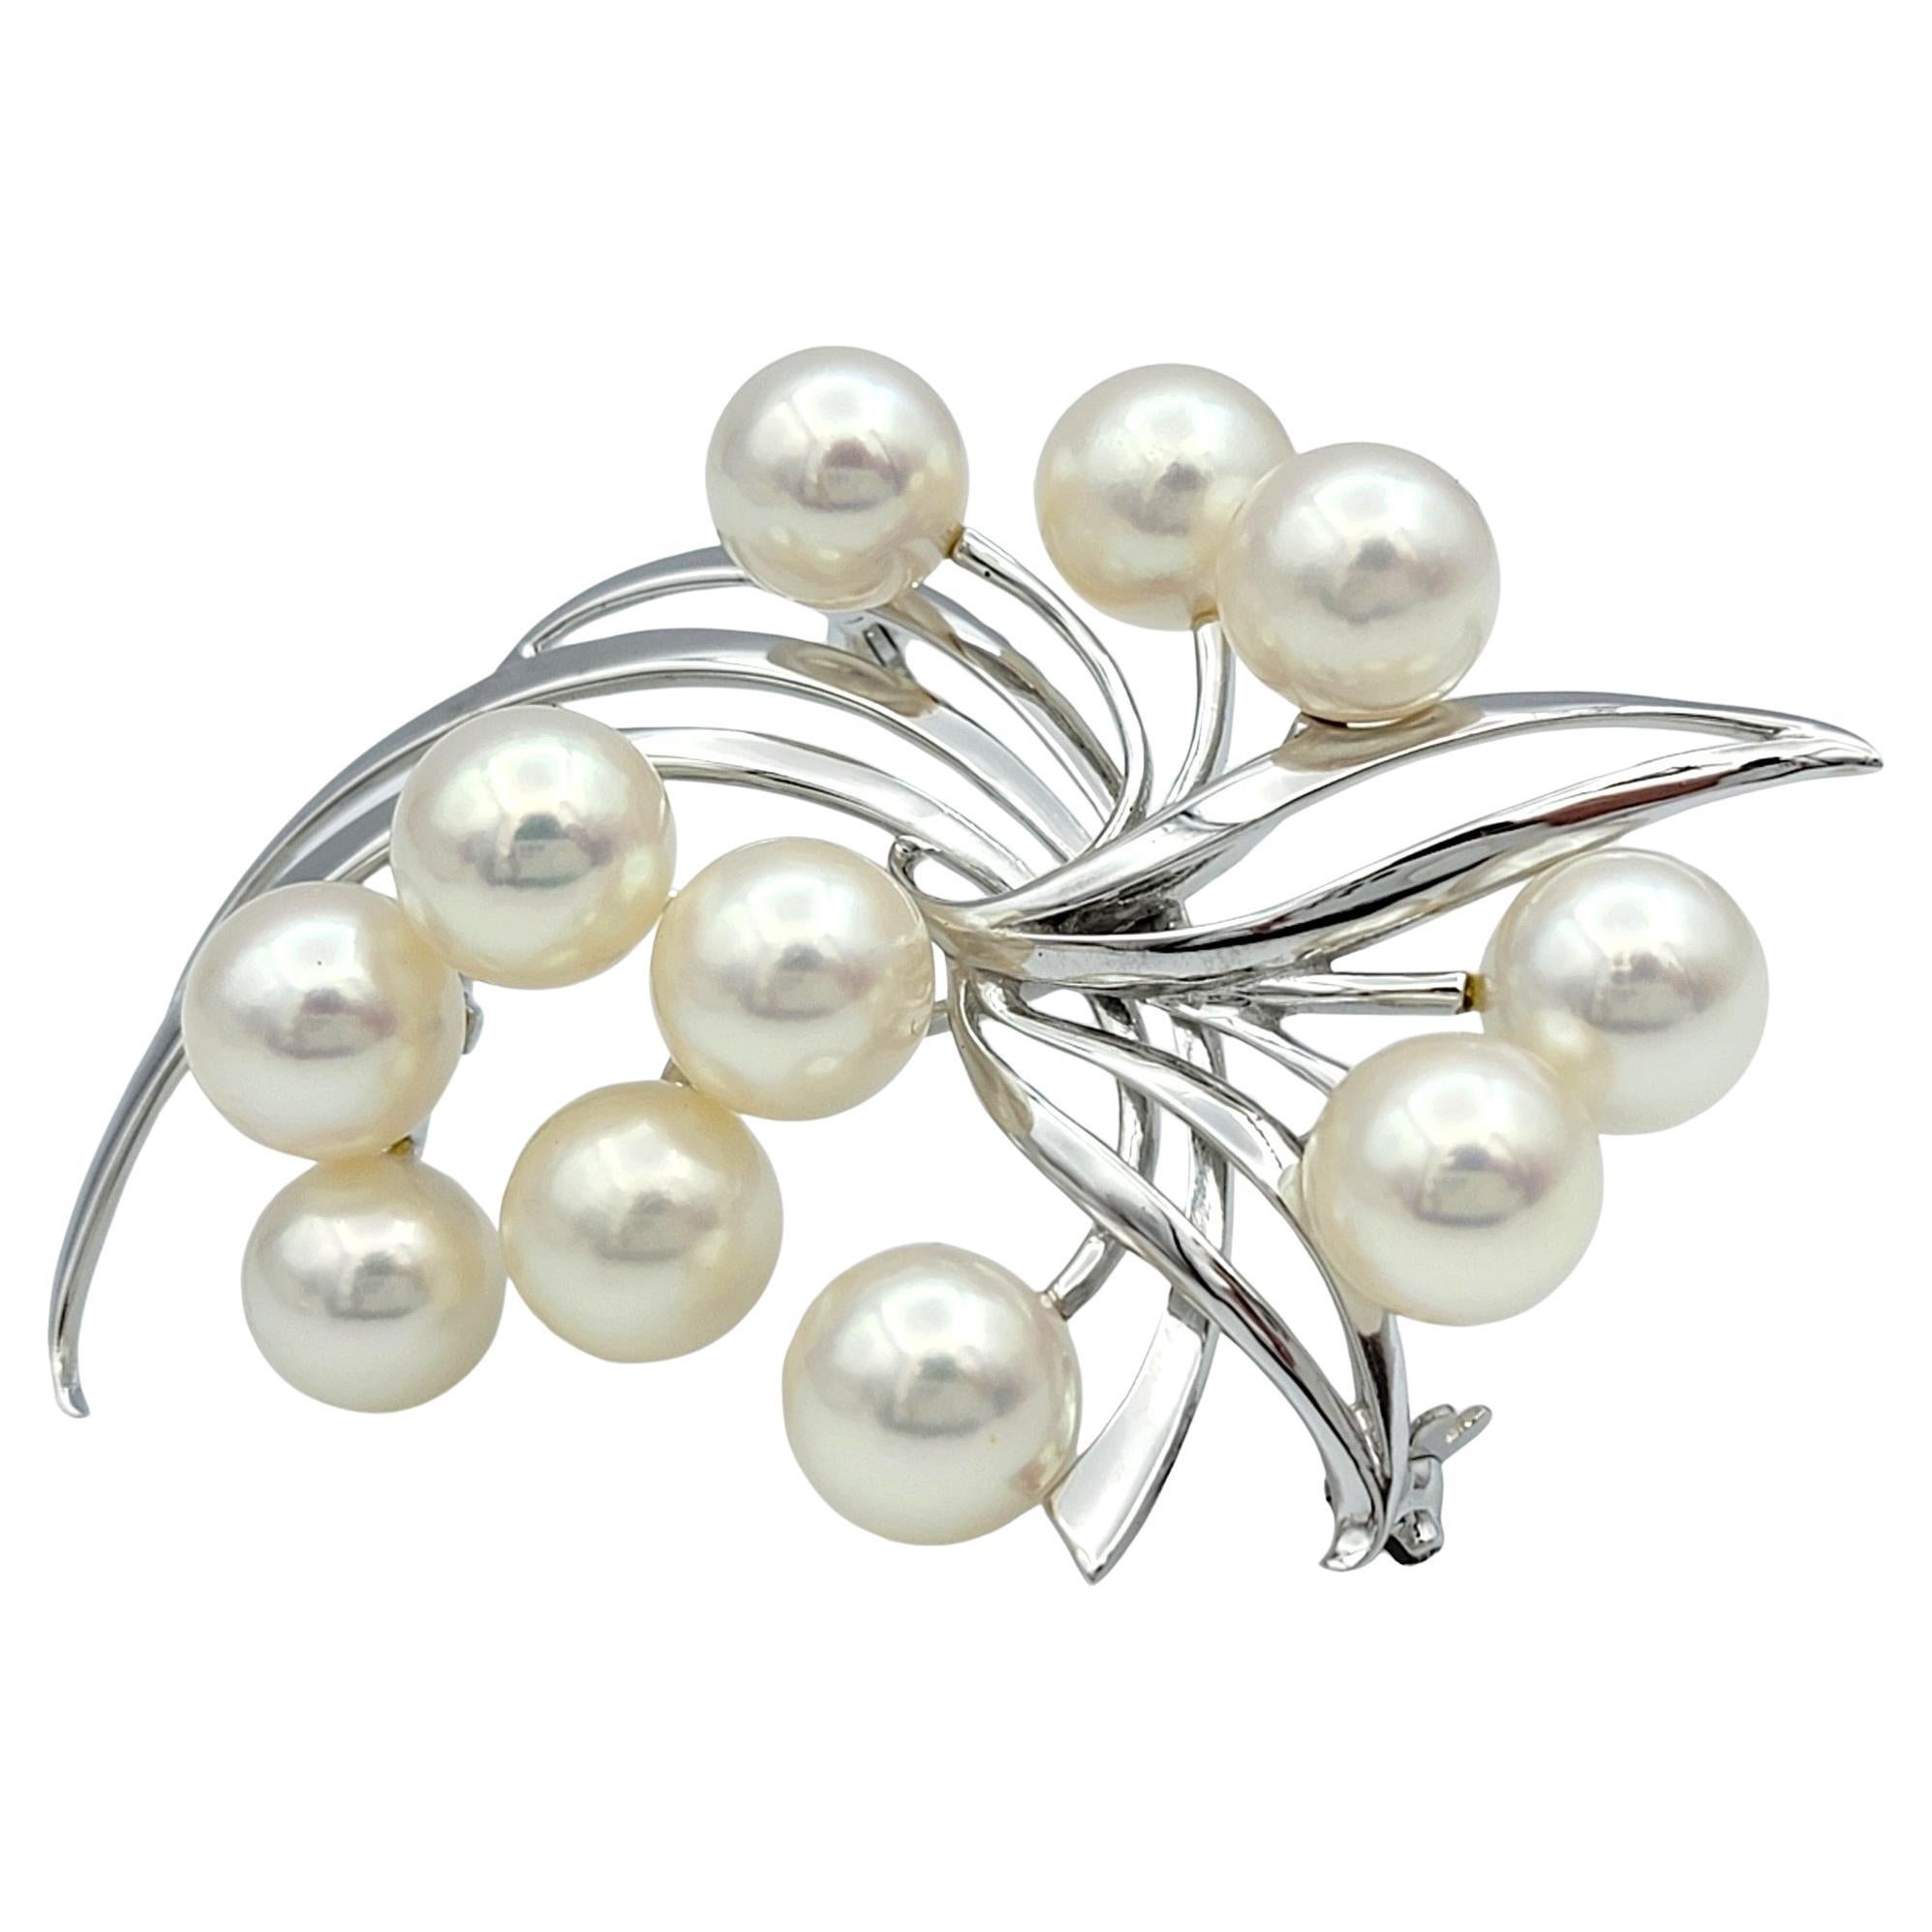 Contemporary Mikimoto White Akoya Cultured Pearl Spray Brooch Set in 14 Karat White Gold For Sale